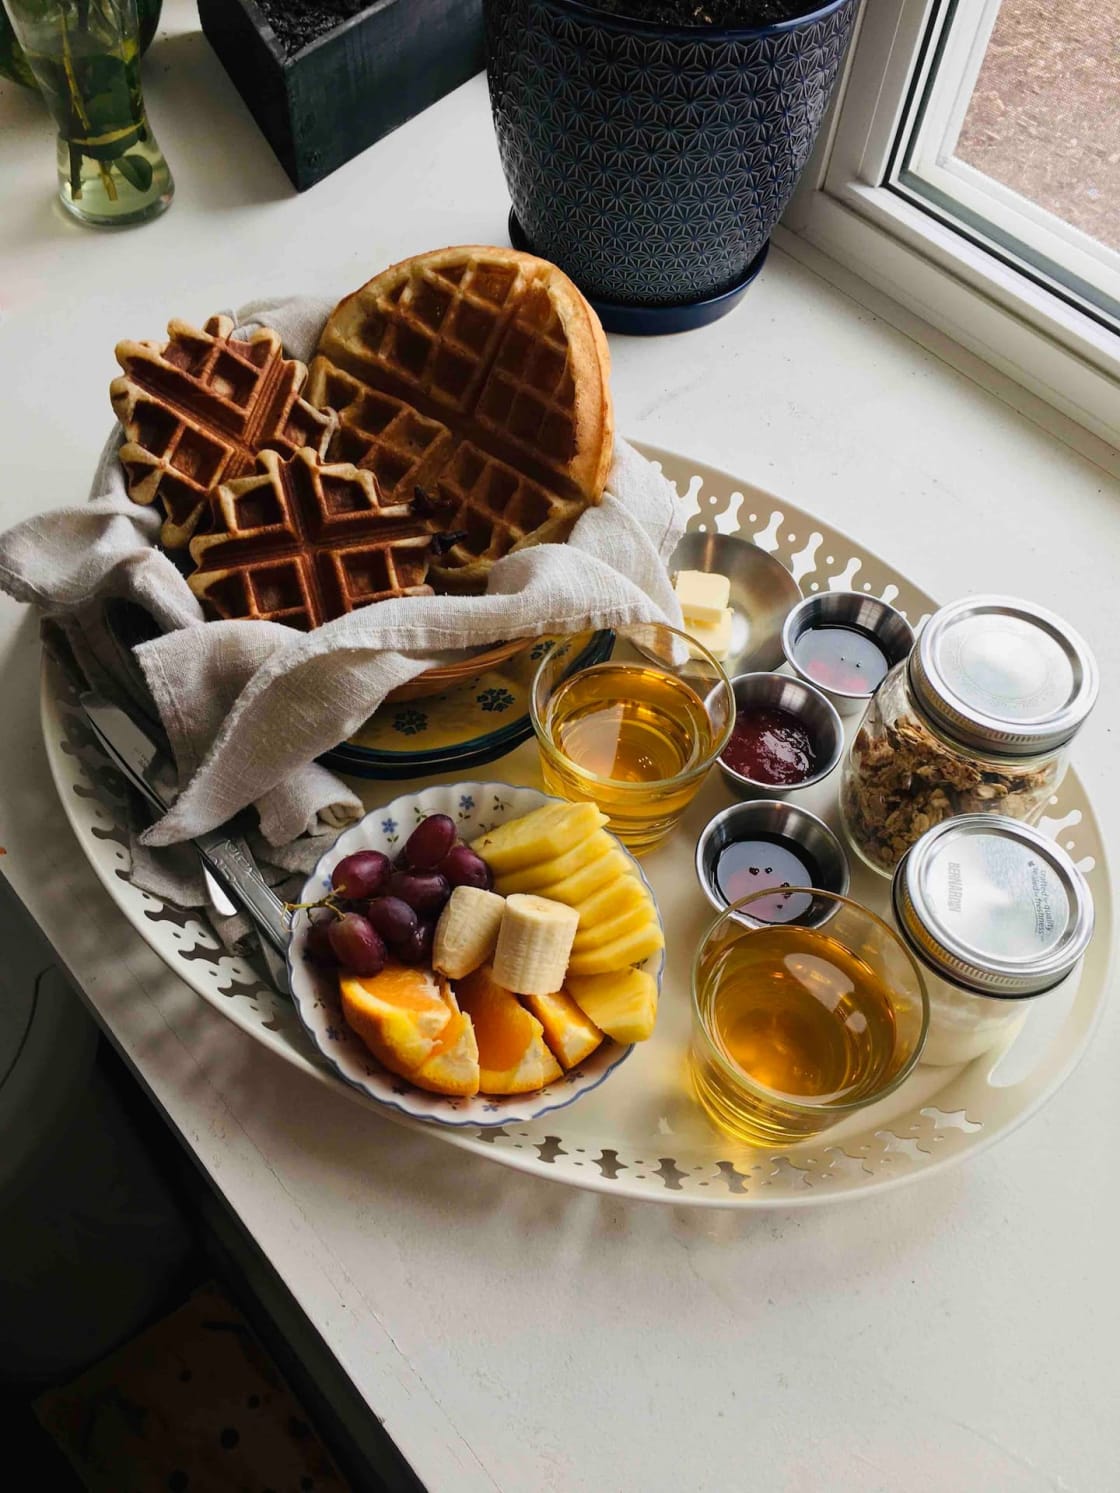 Optional homemade breakfast available for extra, with organic sourdough bread or sourdough Belgium waffles, as well as homemade granola. Available for purchase separately as well. *Photo depicts waffle breakfast for 2